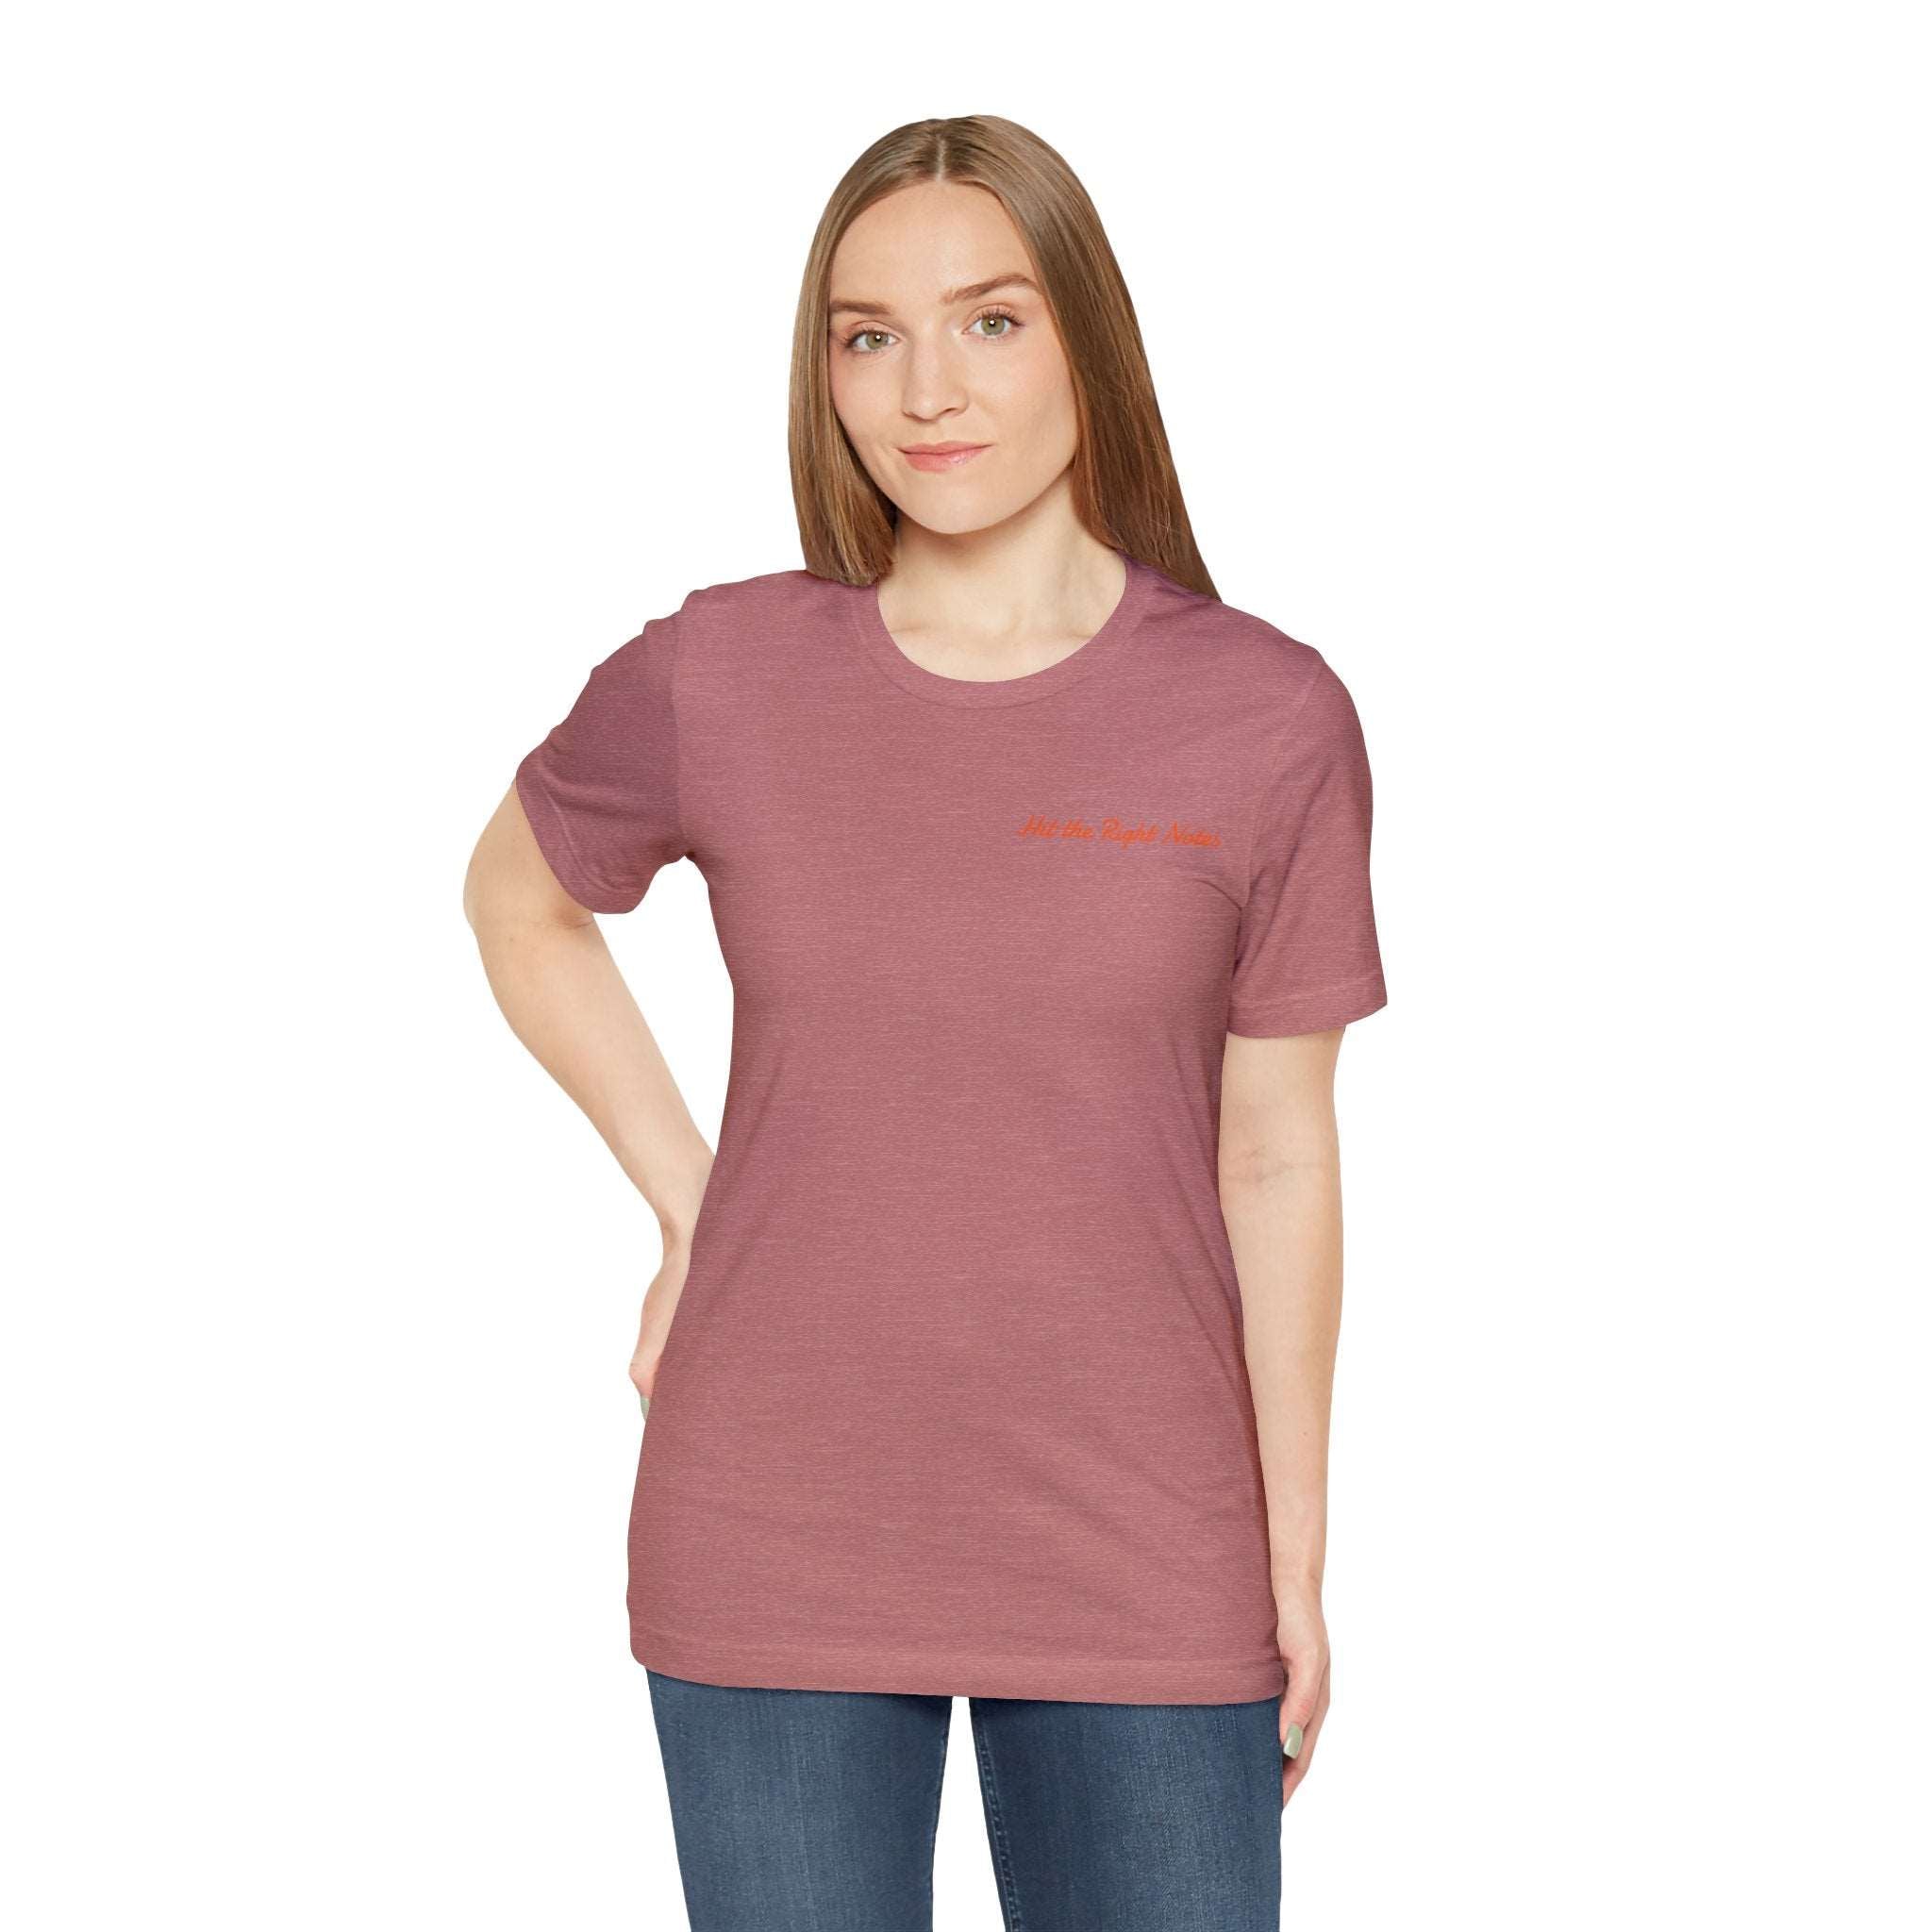 Hit the Right Notes Jersey Tee - Bella+Canvas 3001 Heather Mauve Classic Tee Comfortable Tee Cotton T-Shirt Graphic Tee JerseyTee Statement Shirt T-shirt Tee Unisex Apparel T-Shirt 3010973755472055754_2048_c87ca7dc-4ddd-4f01-9996-3871c1476649 Printify